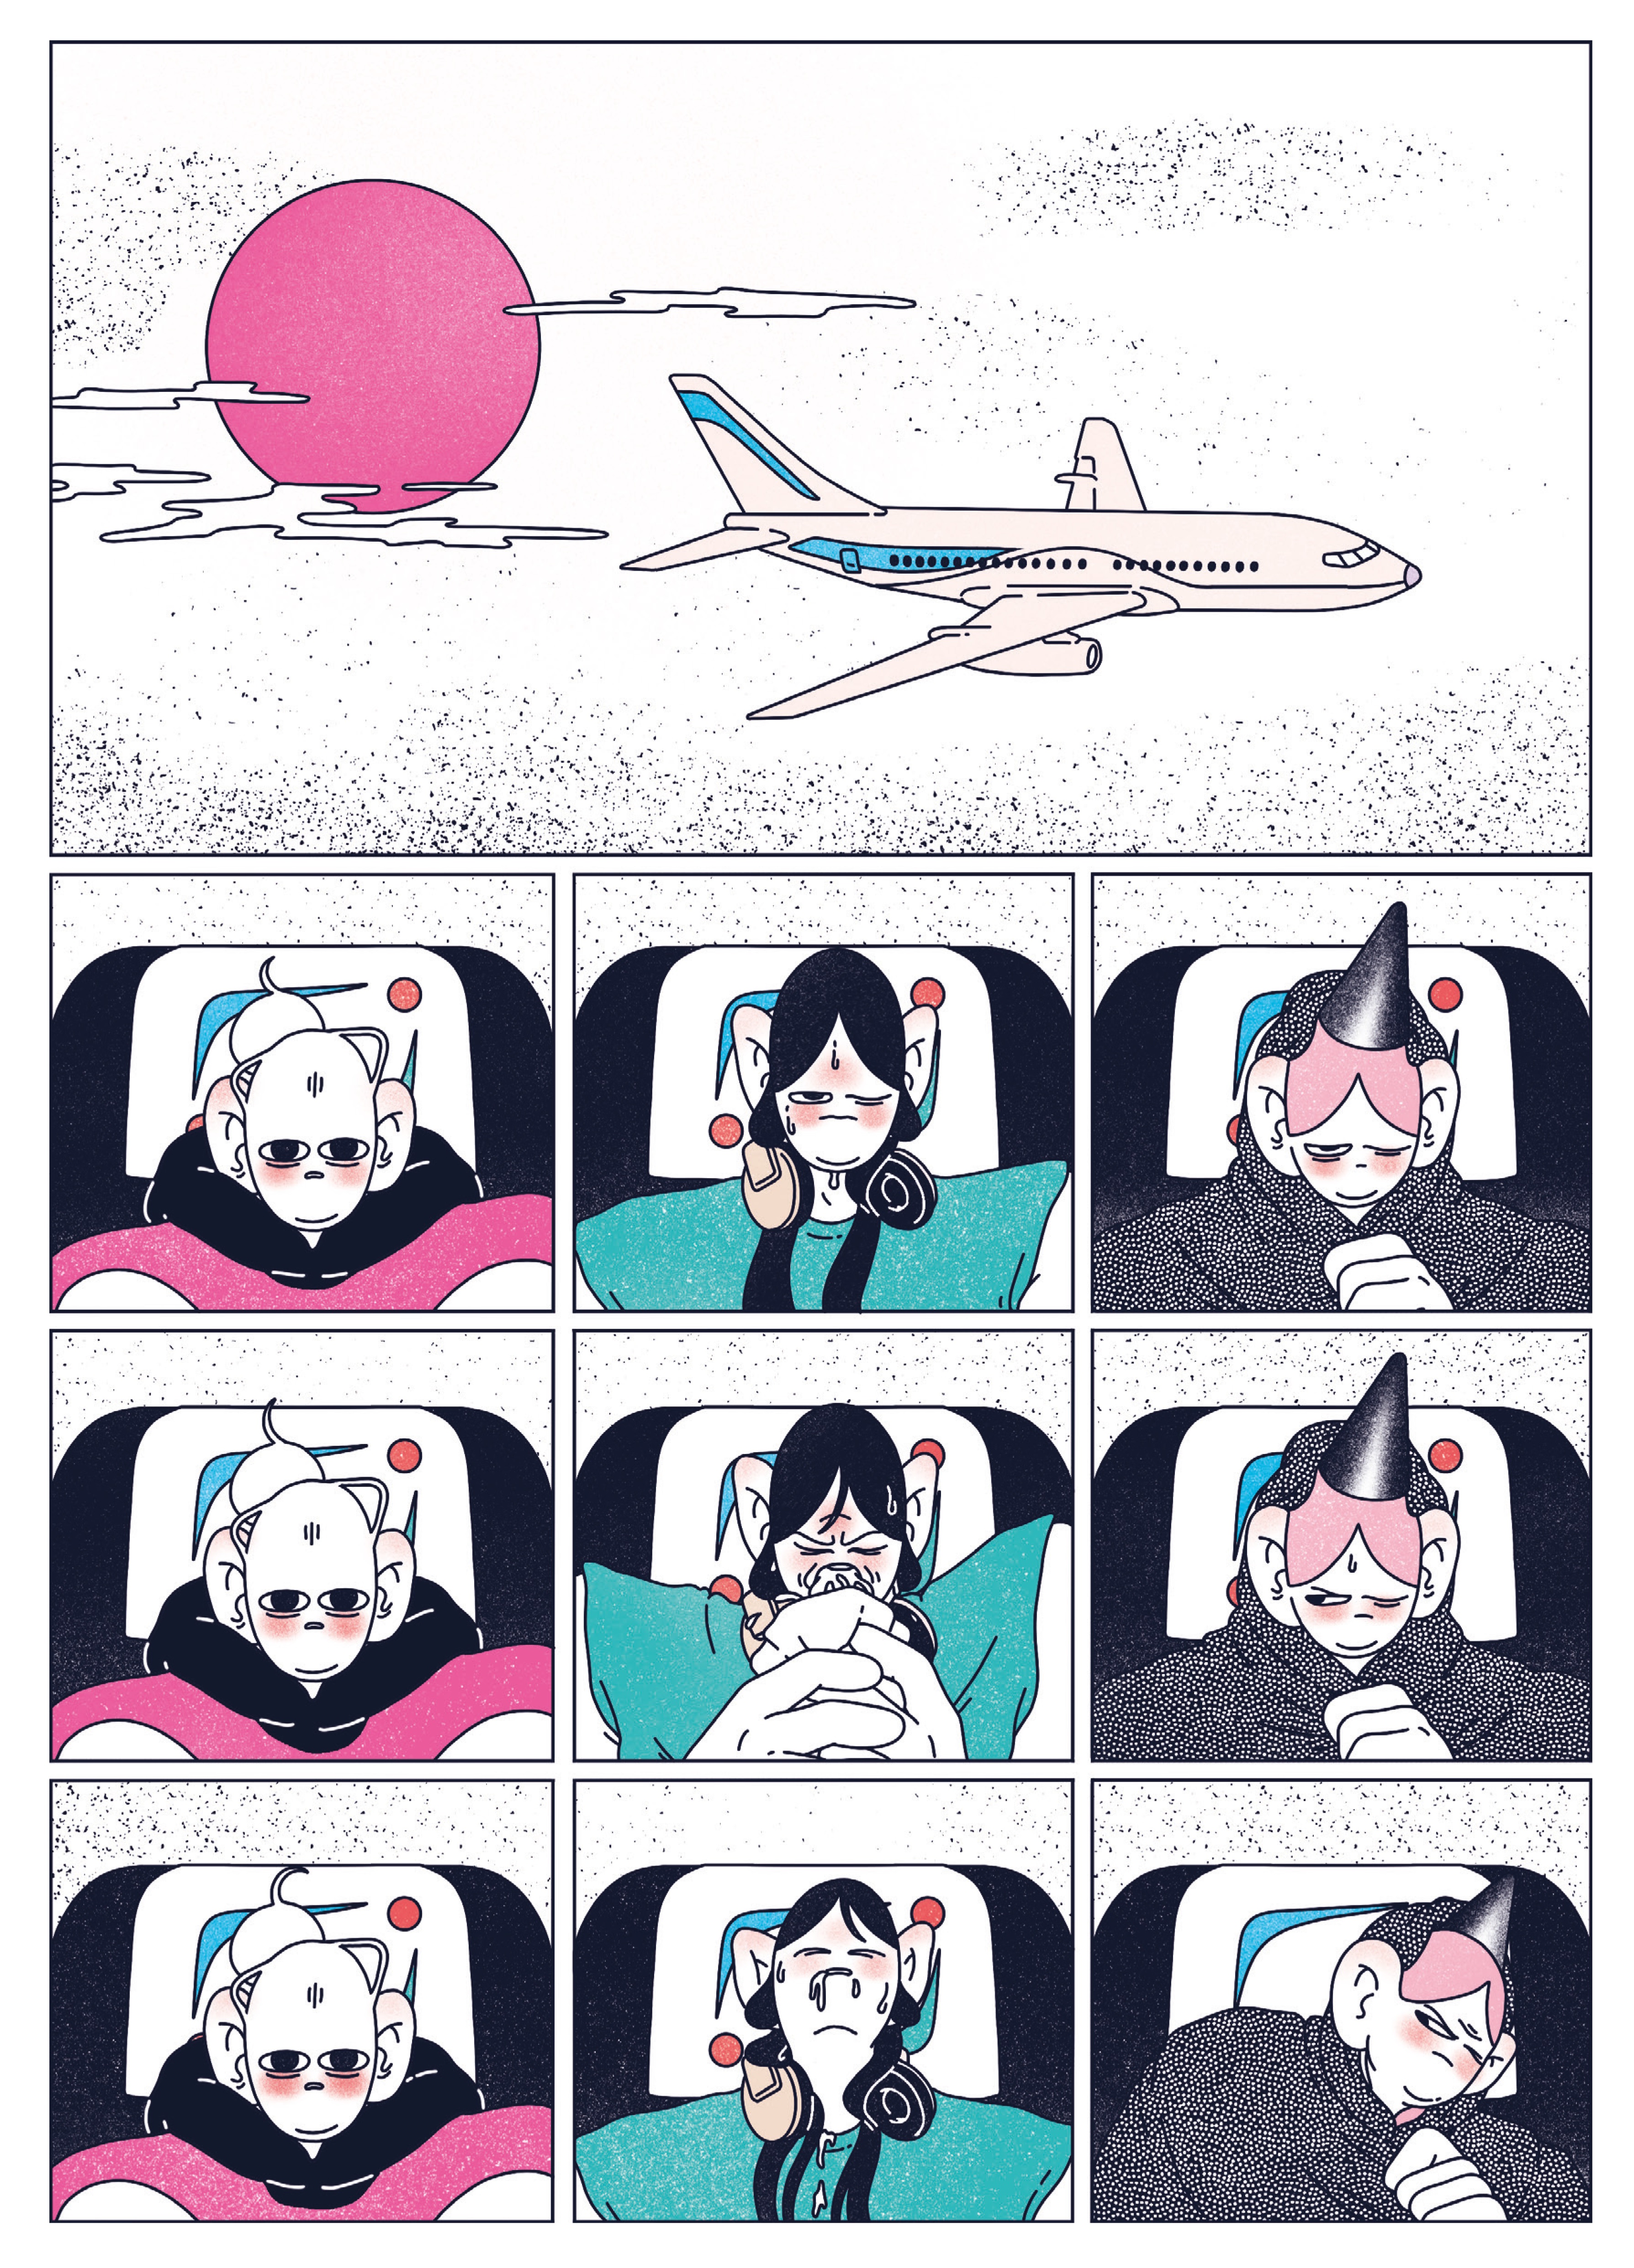 Illustrated images of three characters on a plane